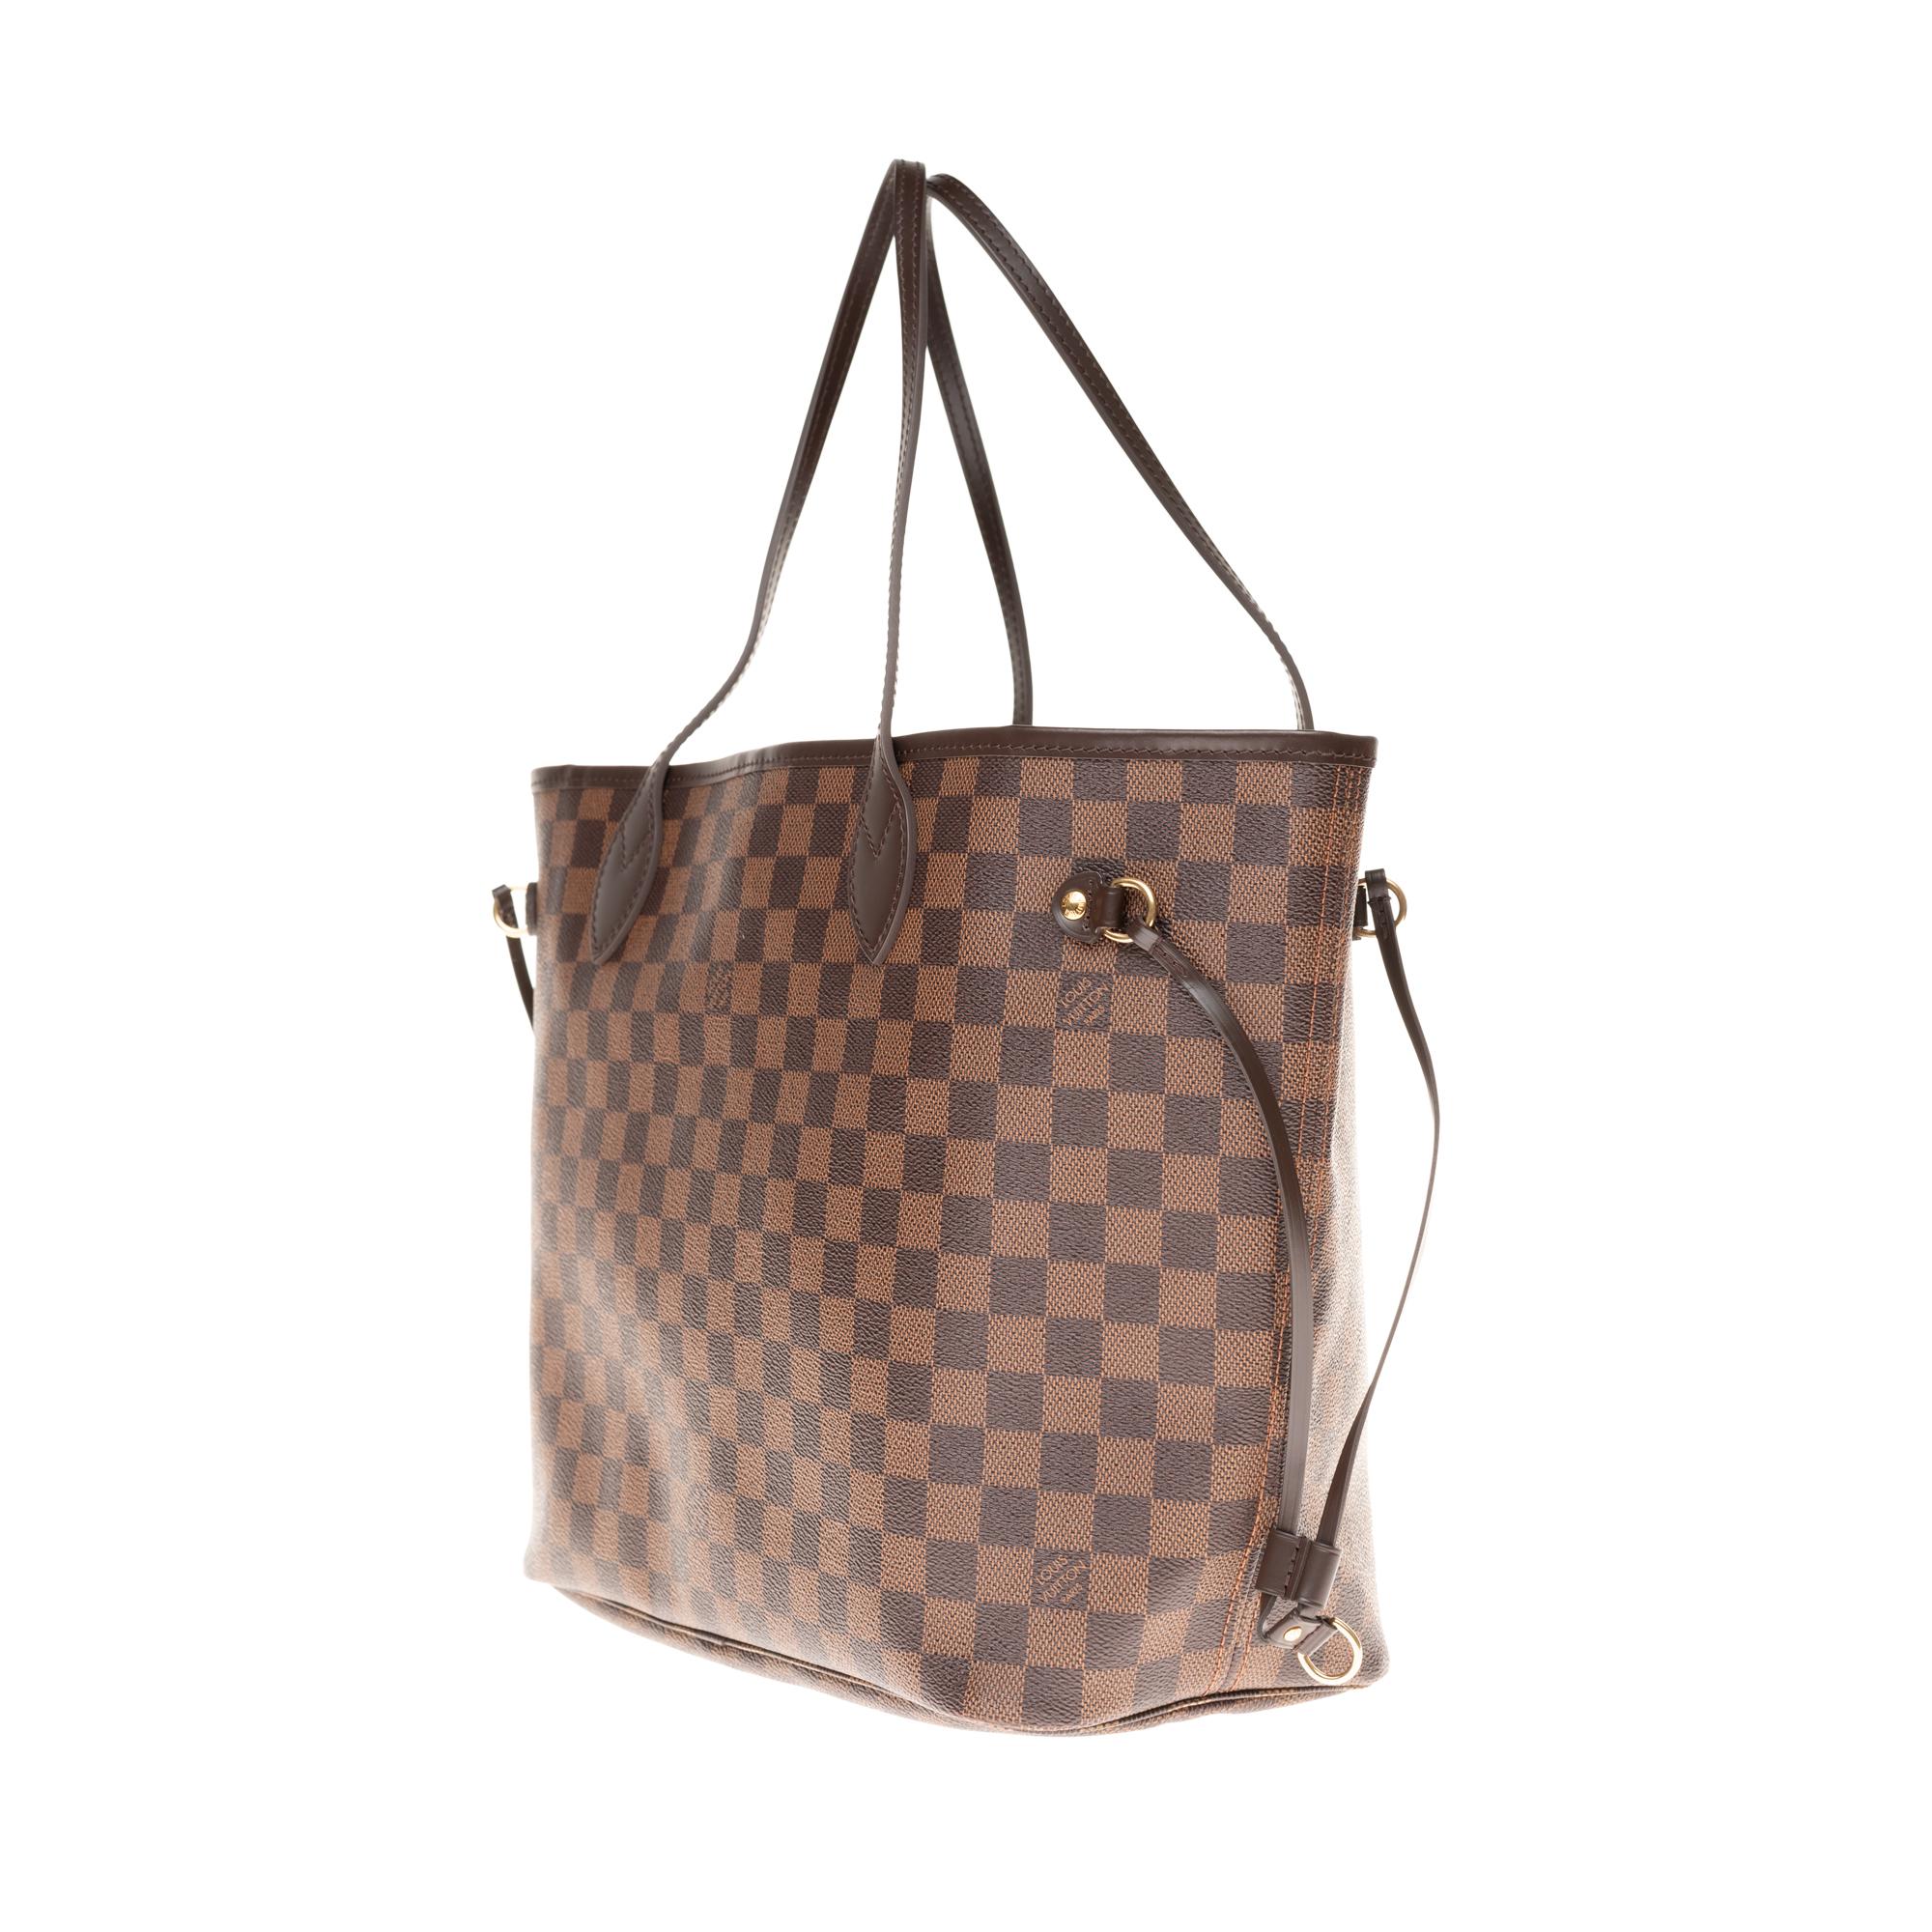 Louis Vuitton Neverfull MM Tote in brown damier canvas with pouch Damen